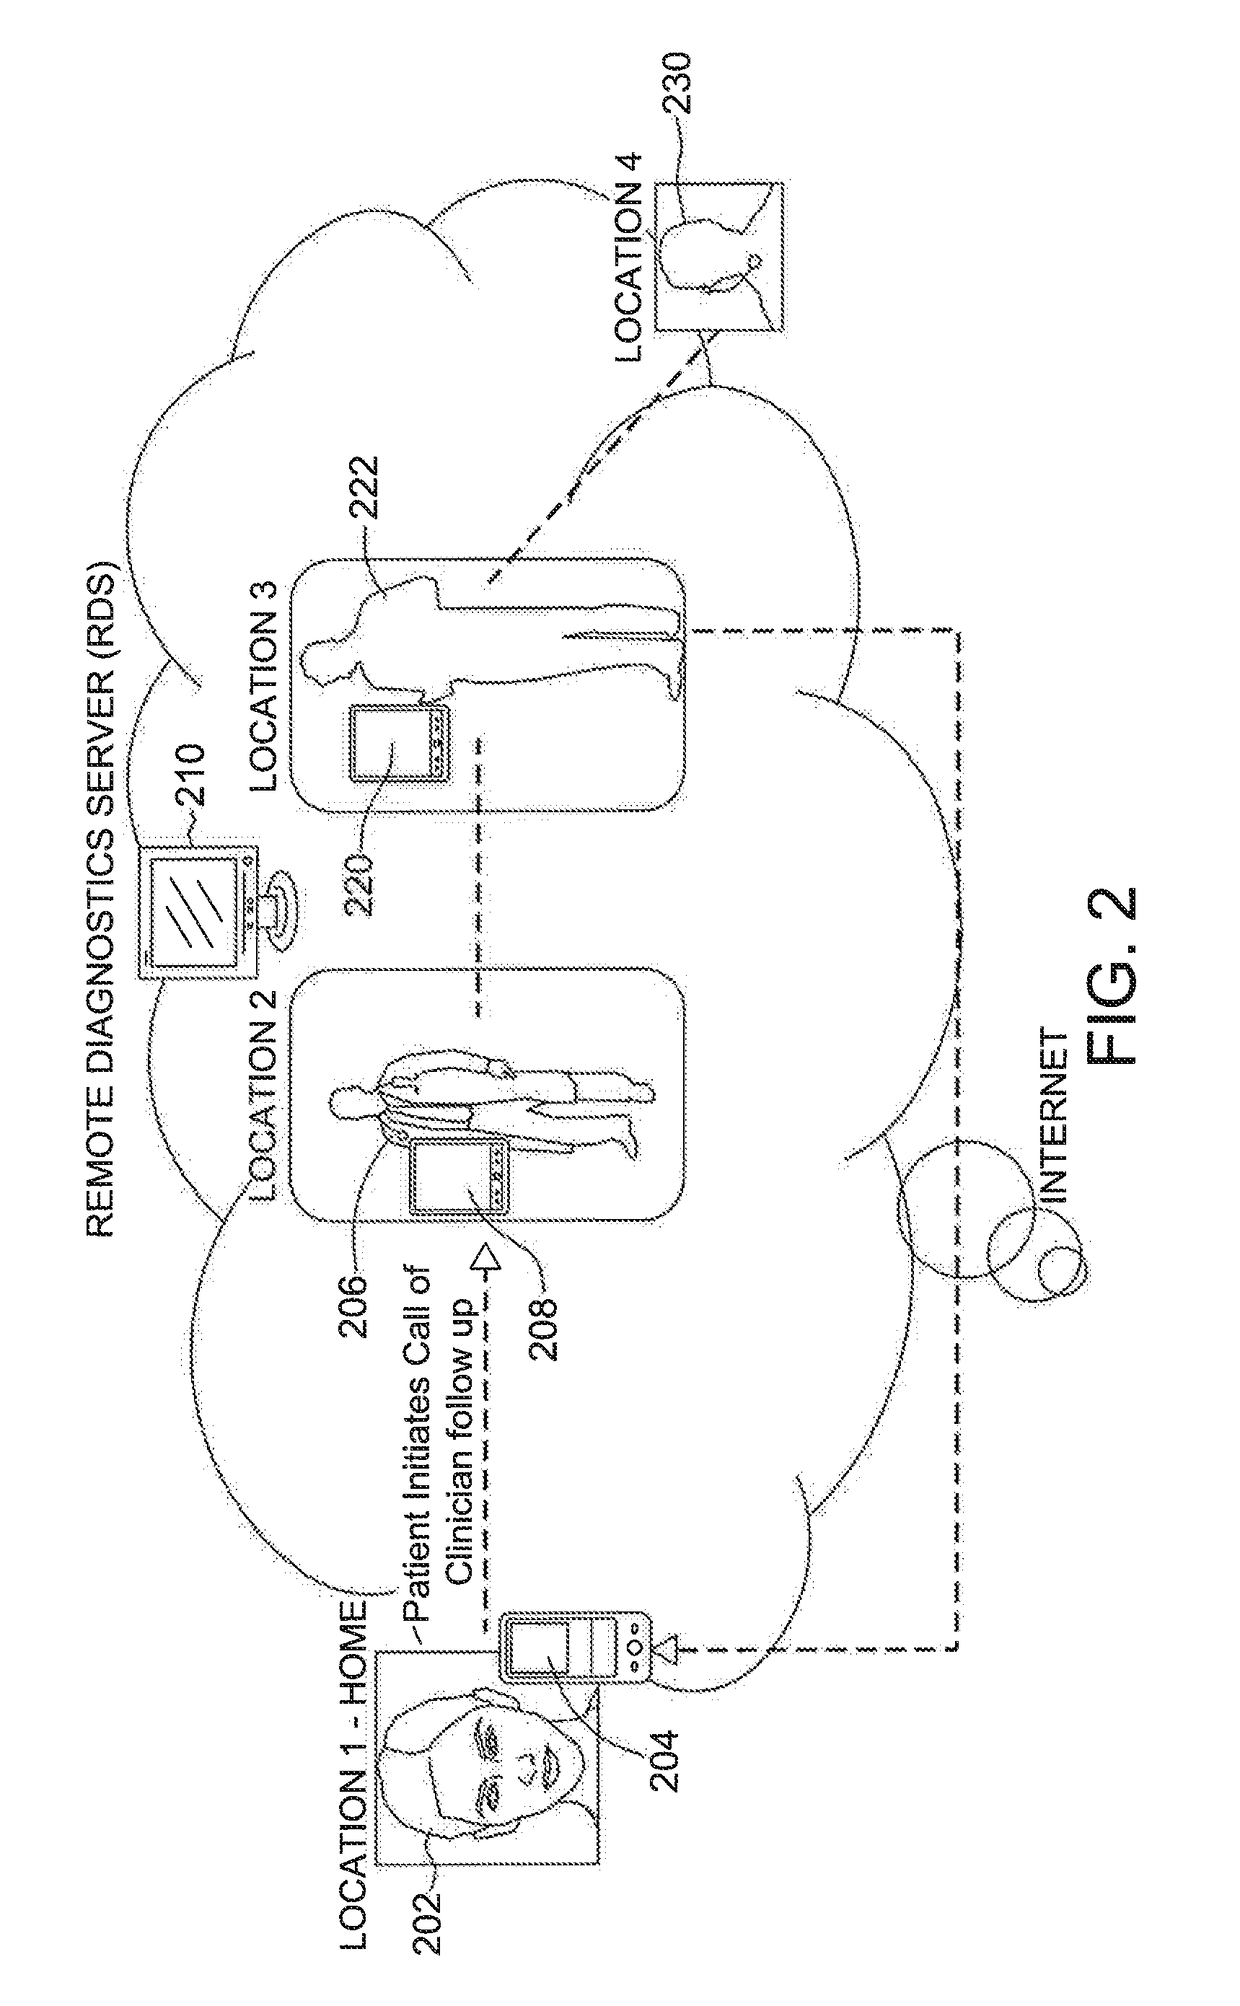 Systems and methods for programming implantable devices